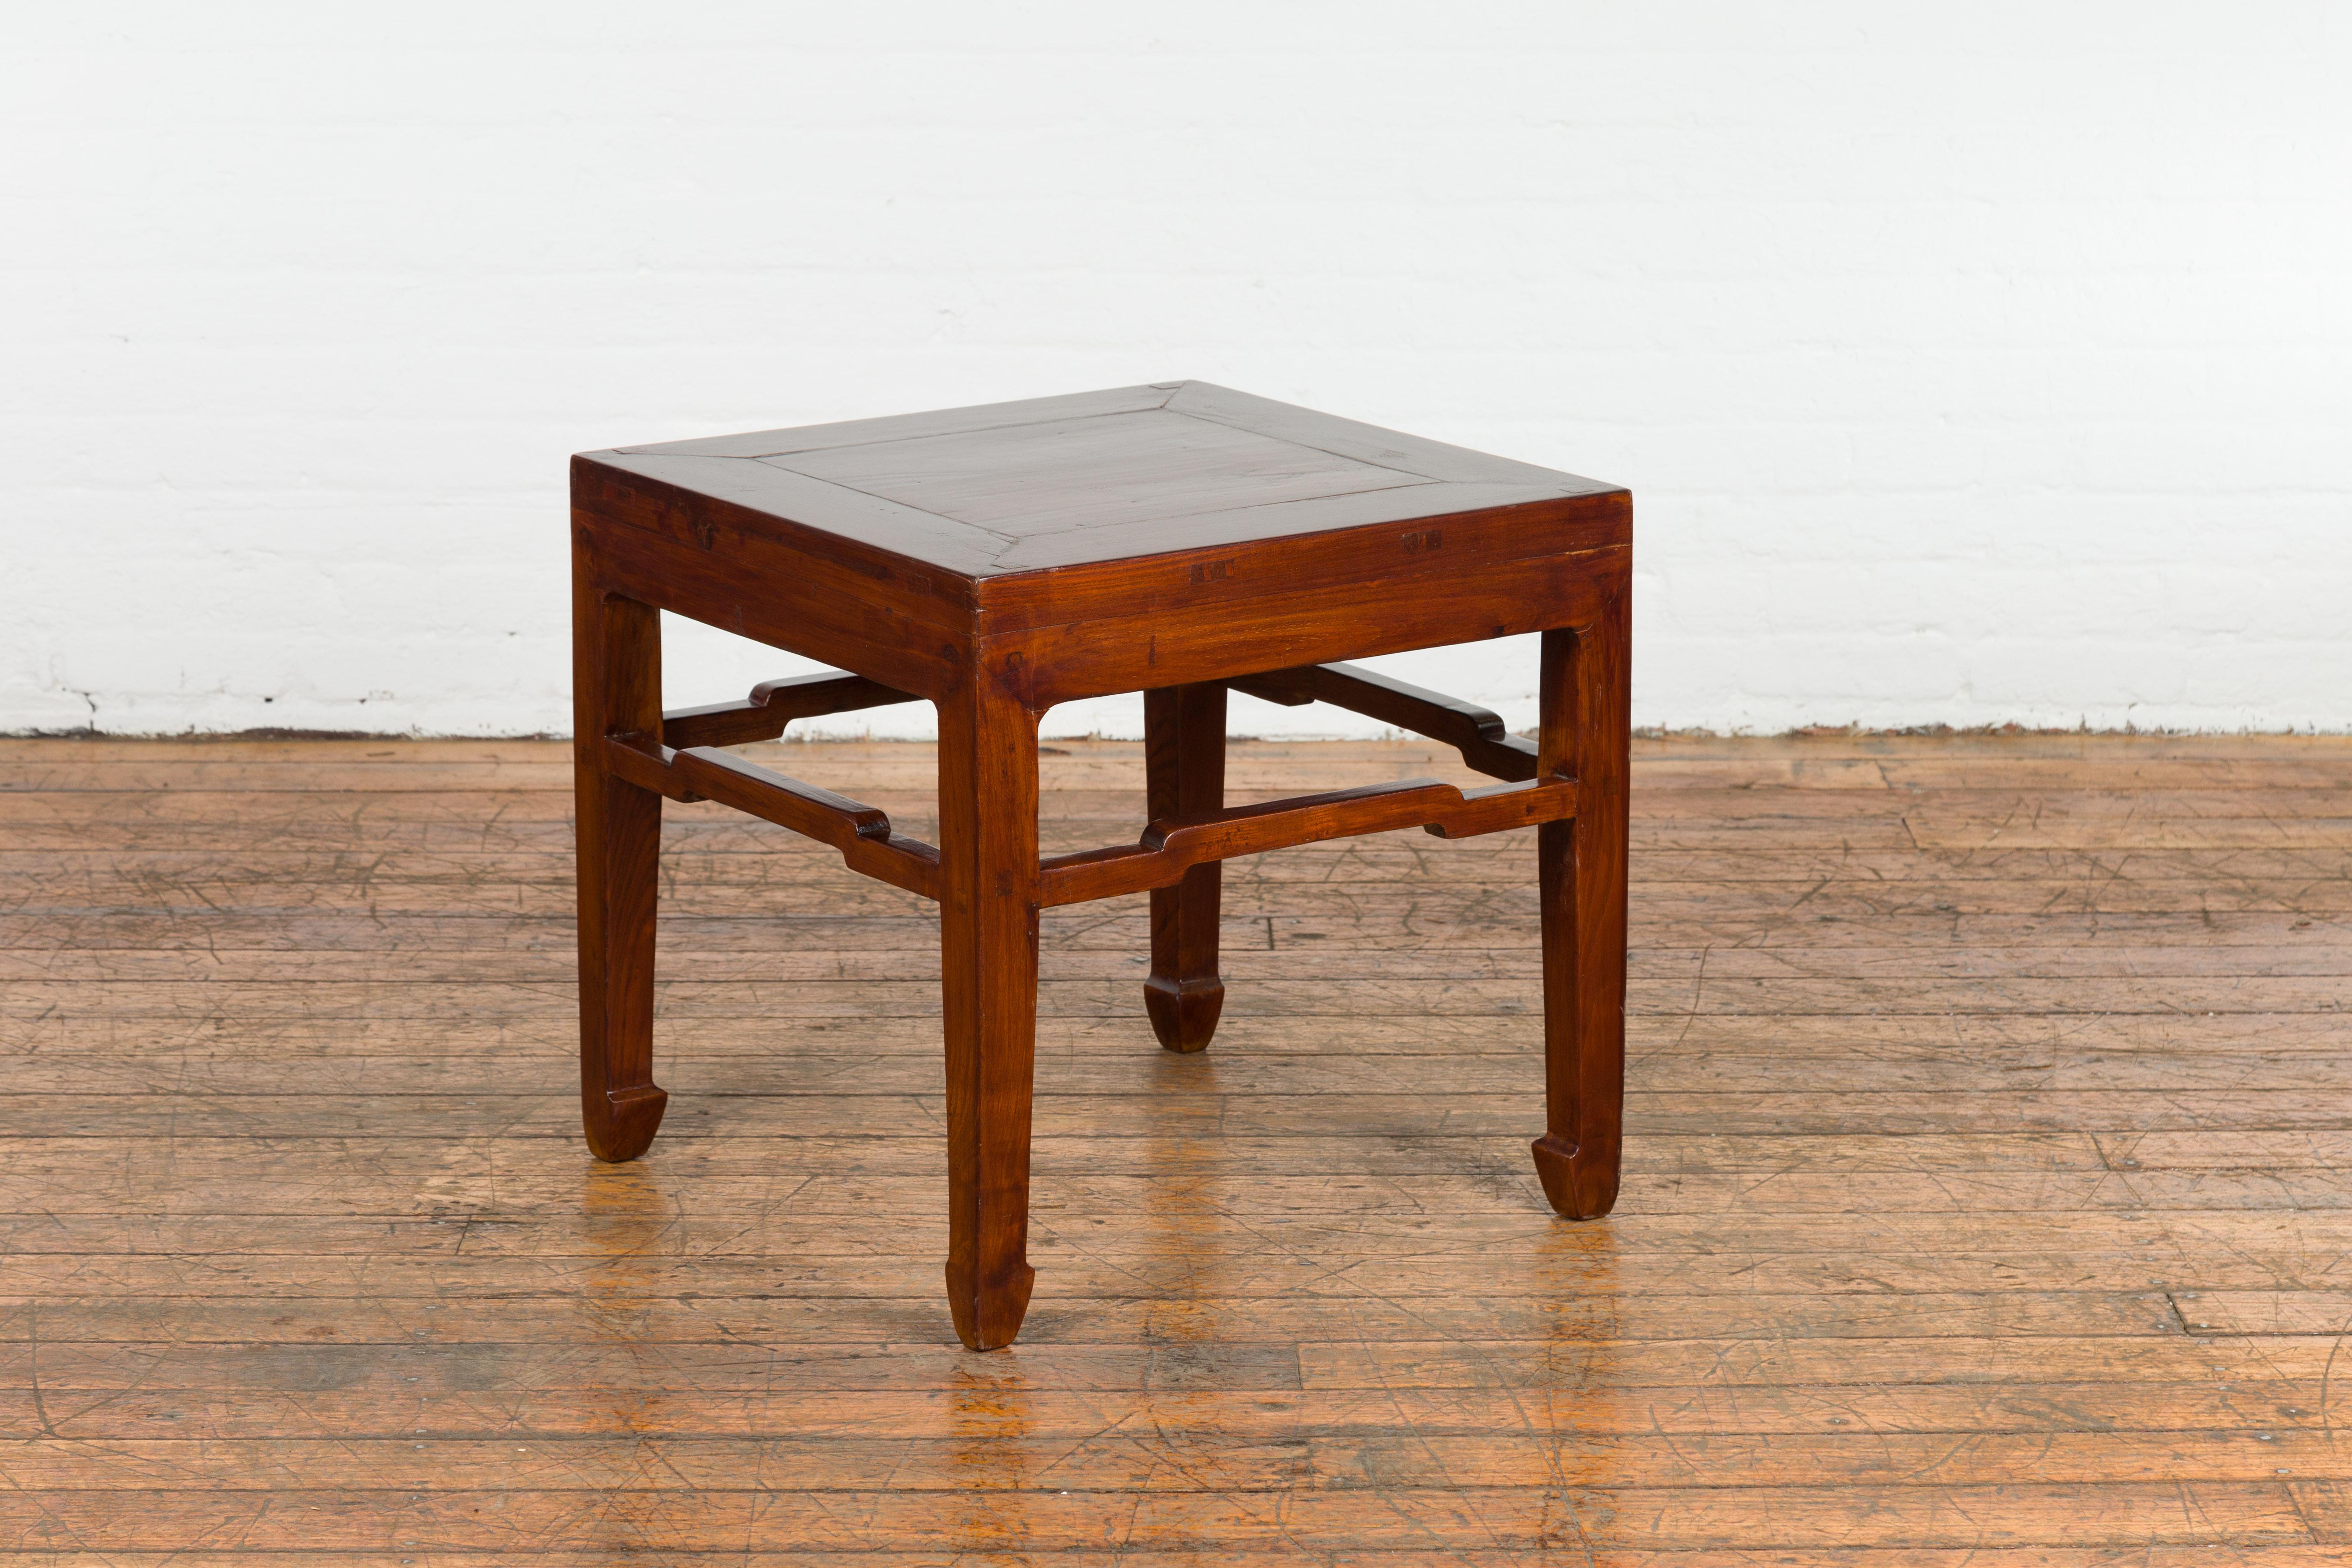 Chinese Qing Dynasty Period 19th Century Side Table with Humpback Stretchers For Sale 5